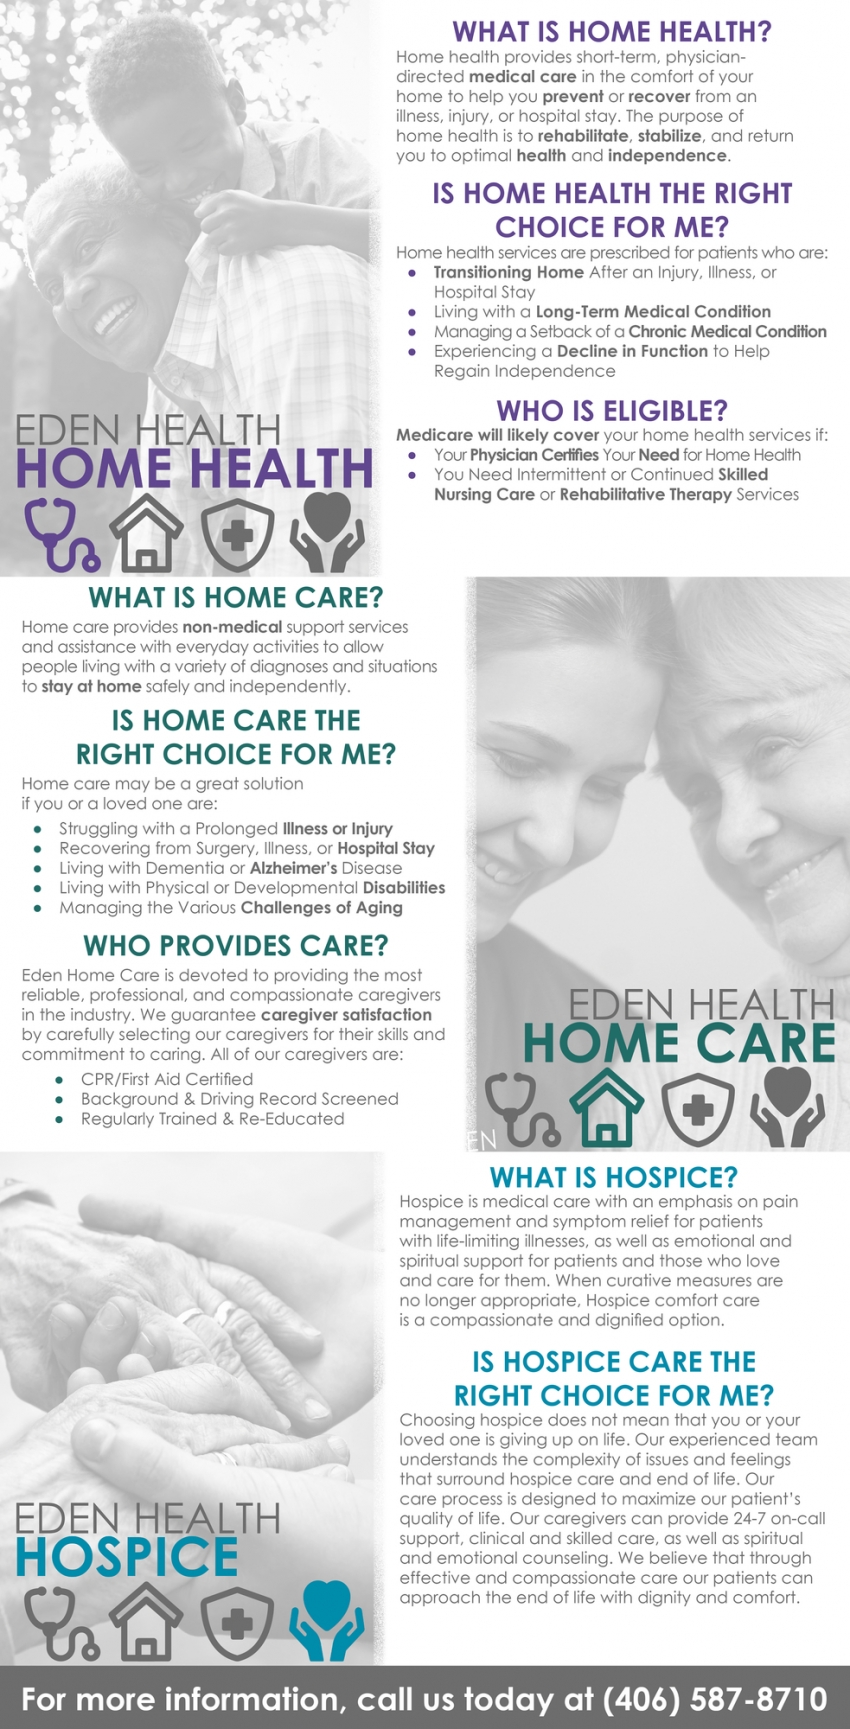 What Is Home Health?